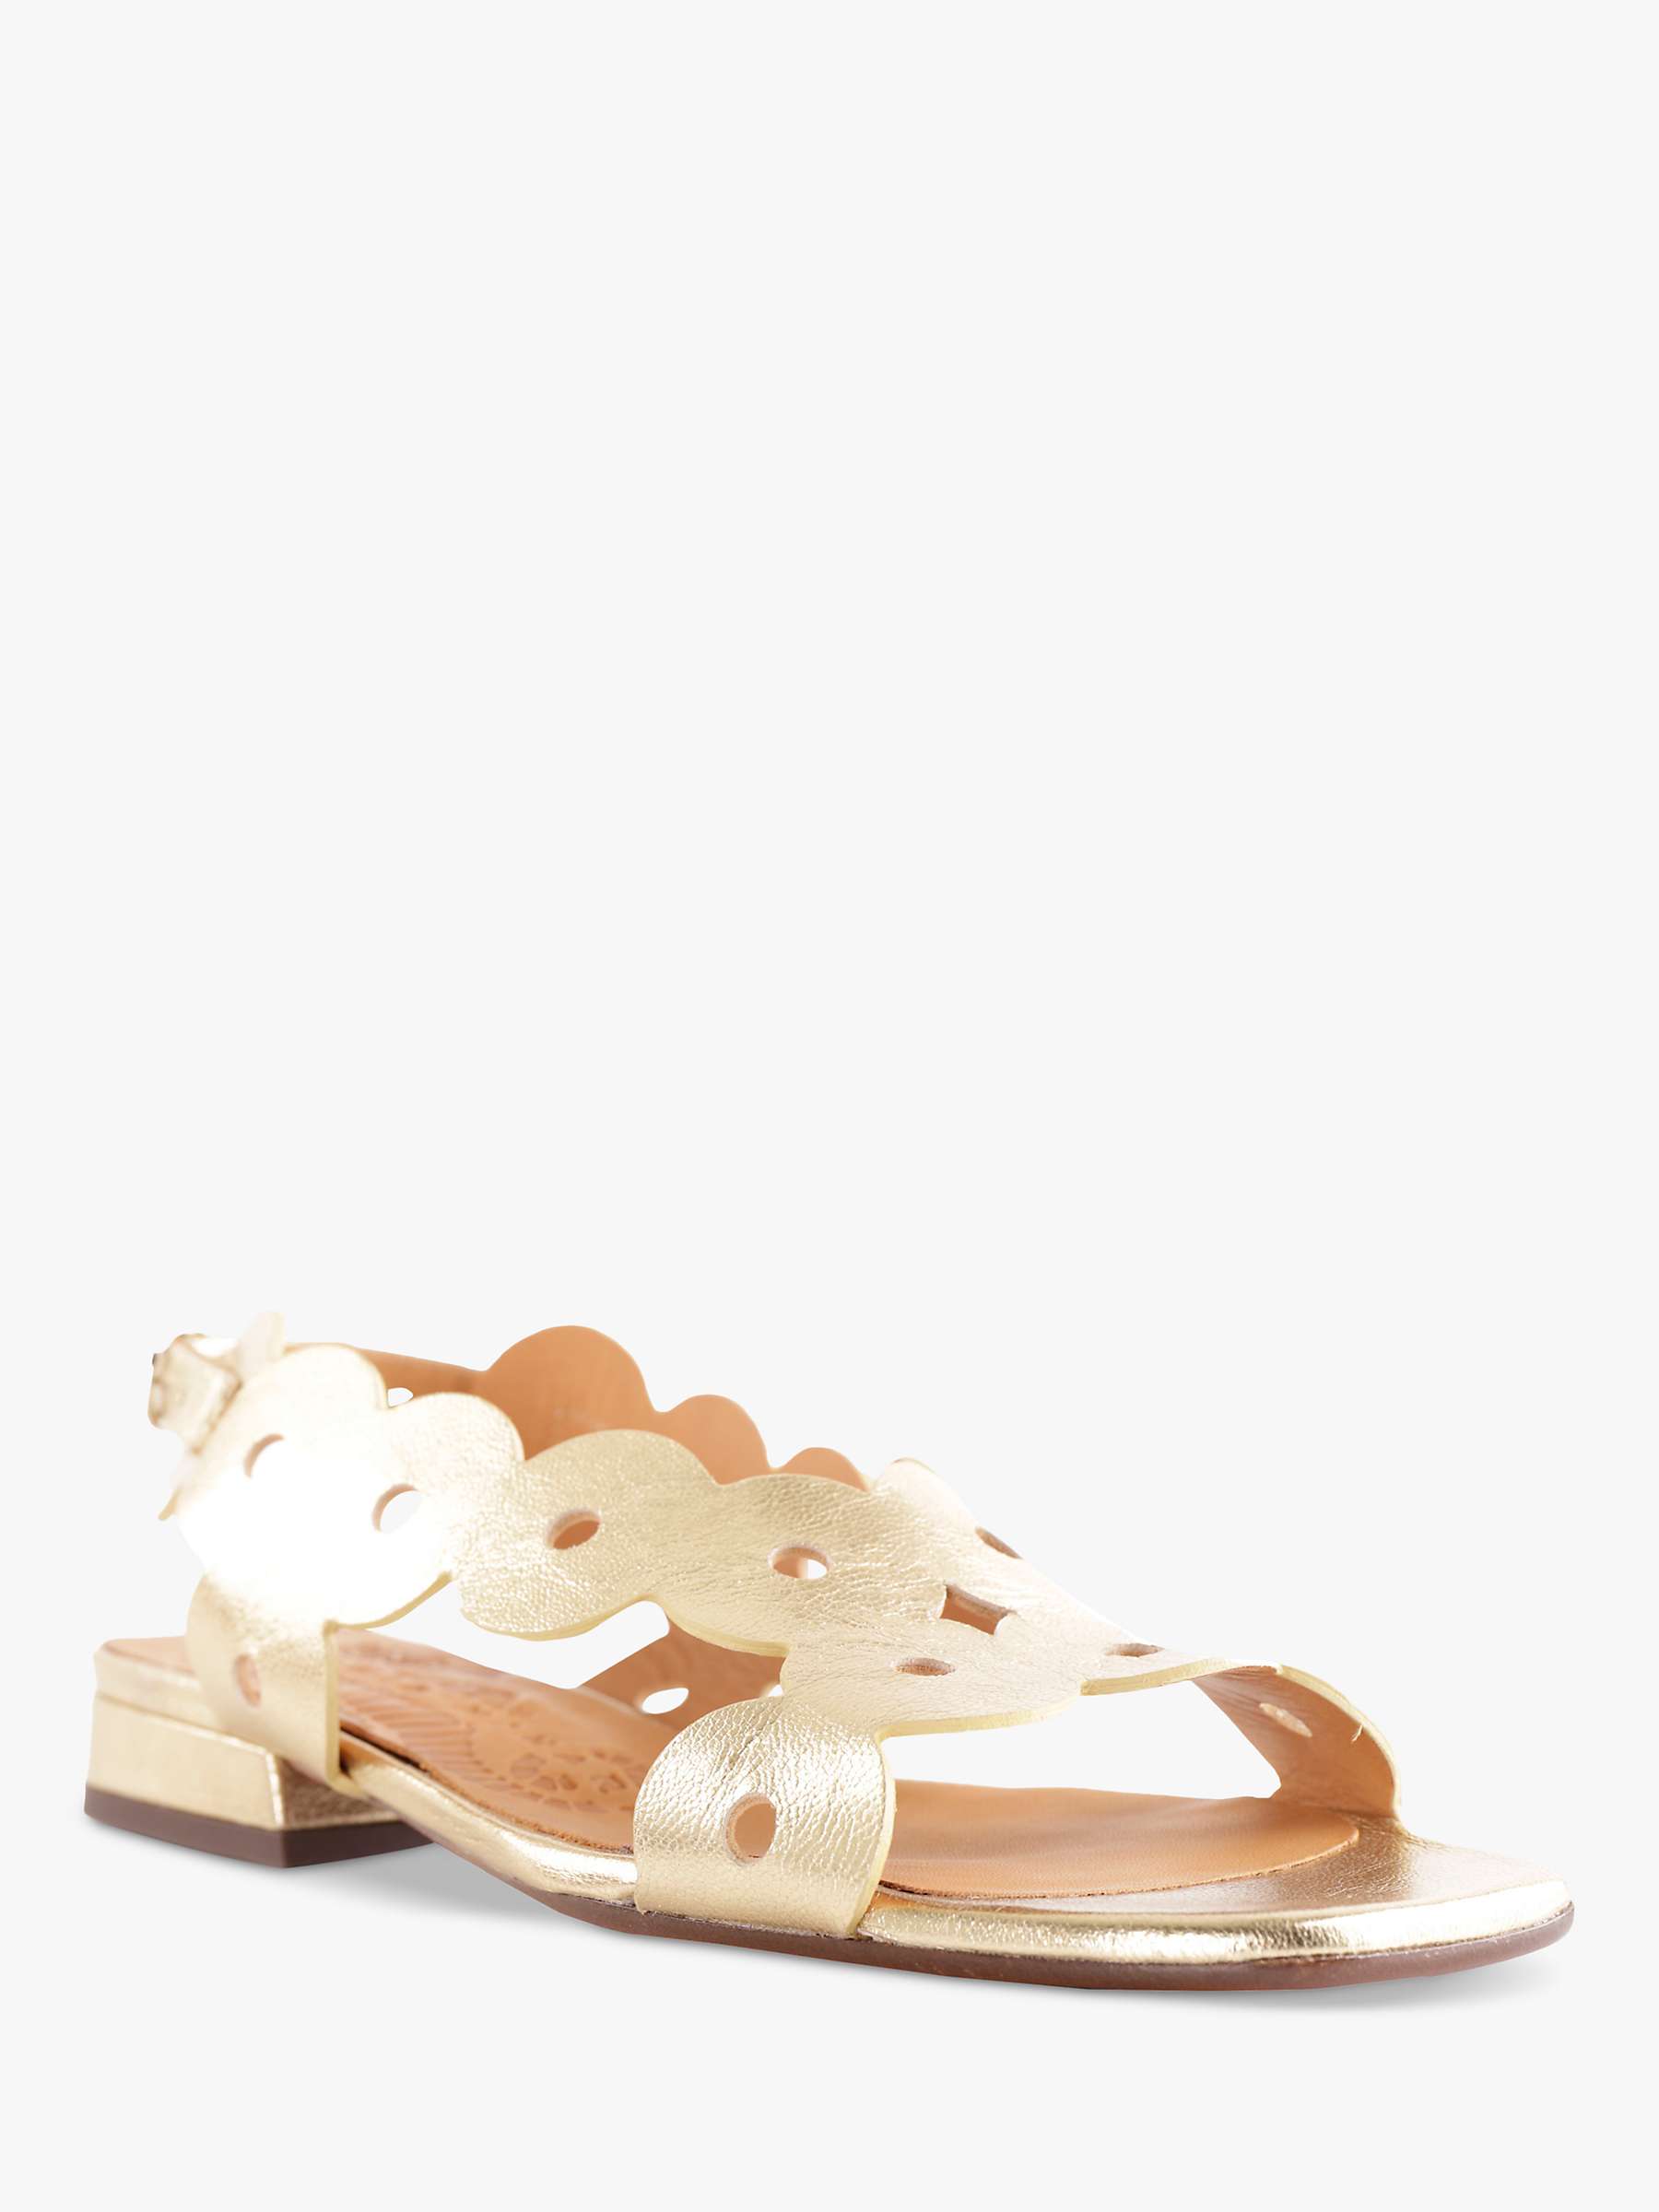 Buy Chie Mihara Teide Leather Sandals, Gold Champagne Online at johnlewis.com